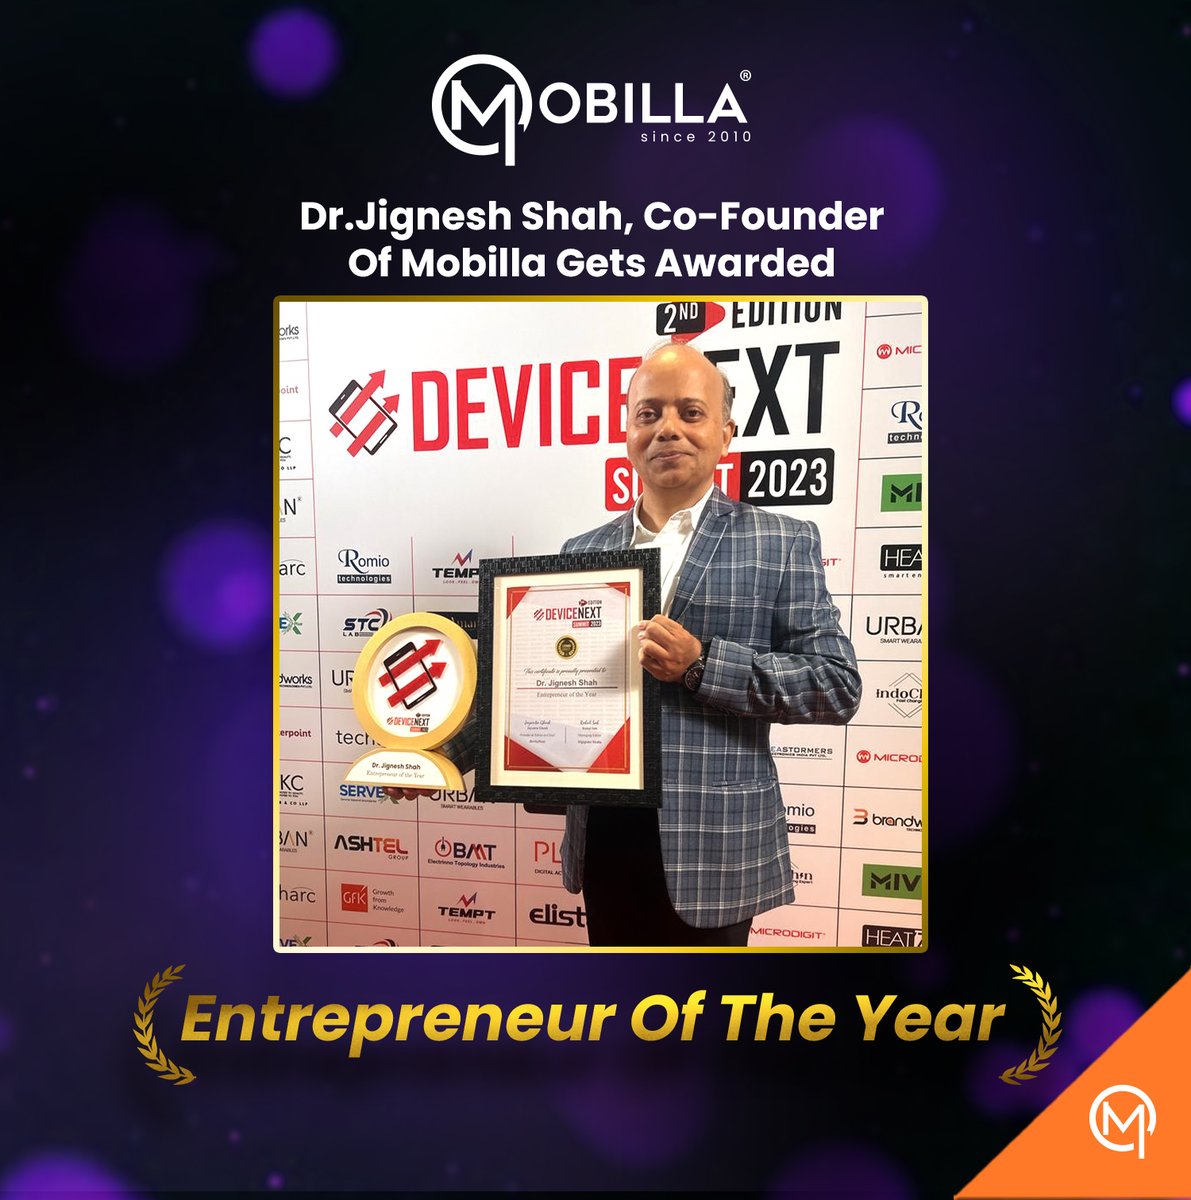 Proud Moment For Team Mobilla!

We Are Proud To Share That Our Co-Founder, Dr. Jignesh Shah, Has Won The Prestigious DEVICENEXT 'Entrepreneur Of The Year' Award. Additionally, Mobilla Has Been Awarded 'India’s Most Trusted Mobile Accessories Brand Of The Year.'

These Are Not…